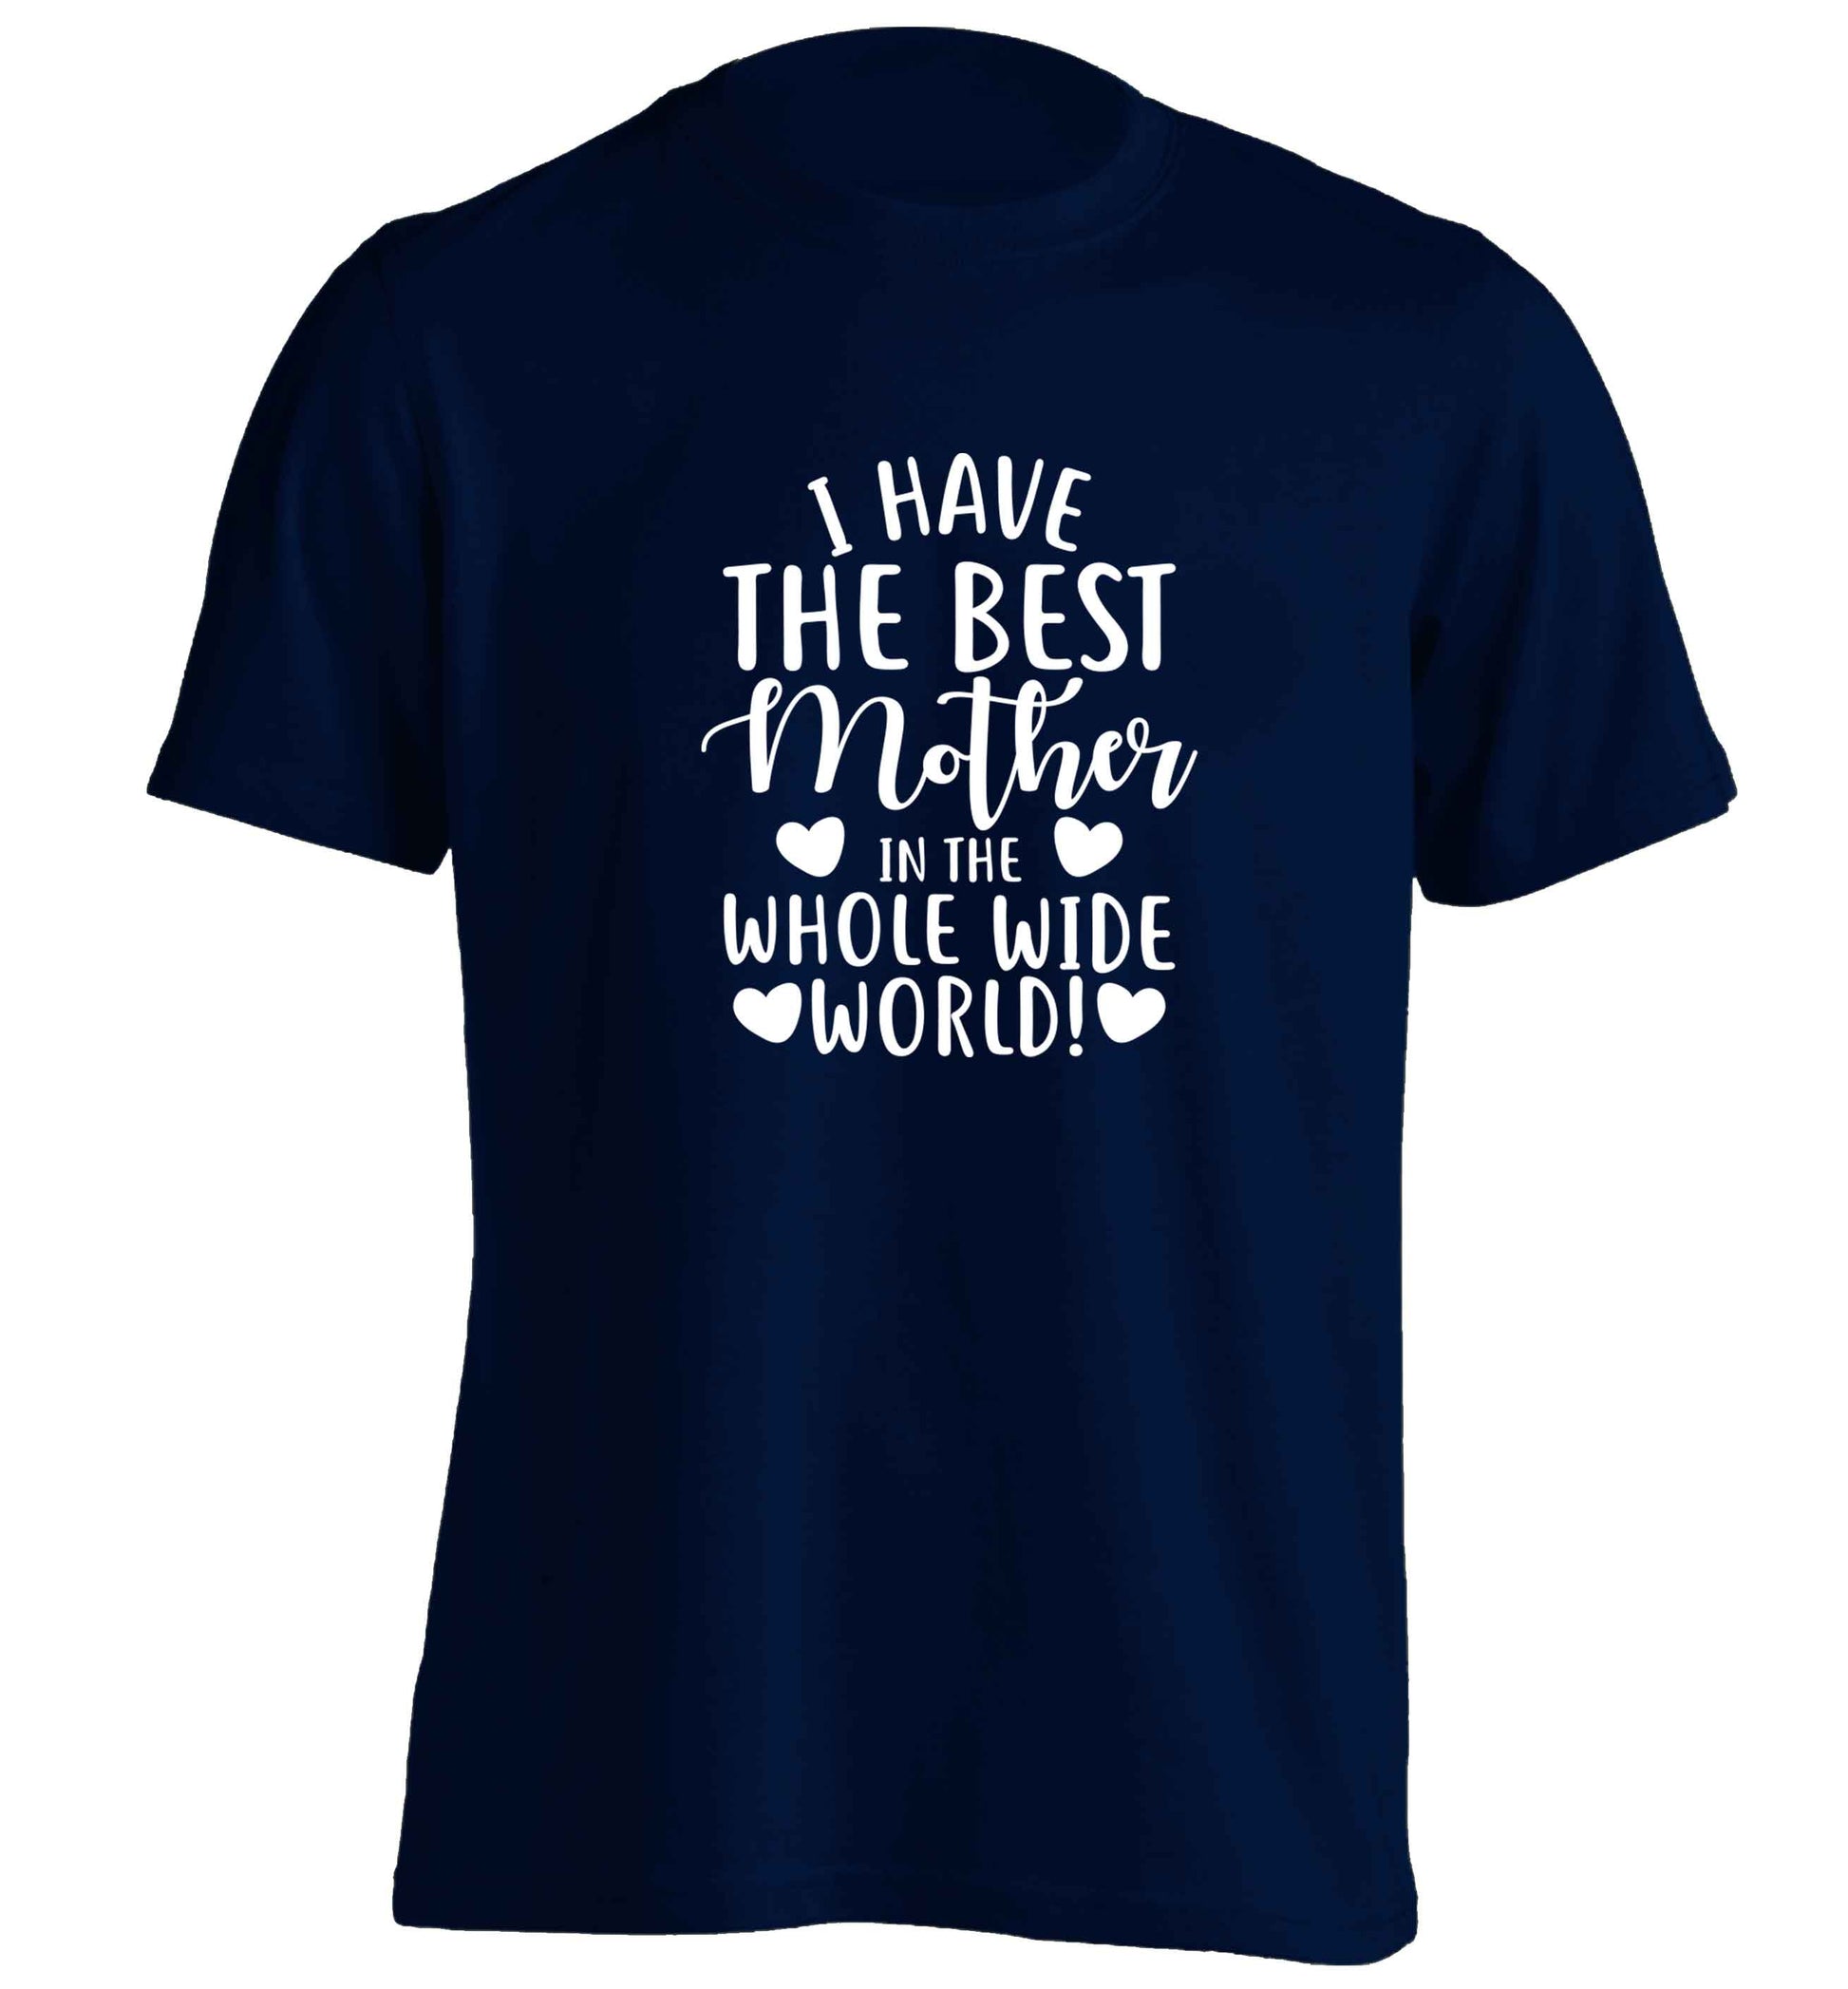 I have the best mother in the whole wide world adults unisex navy Tshirt 2XL